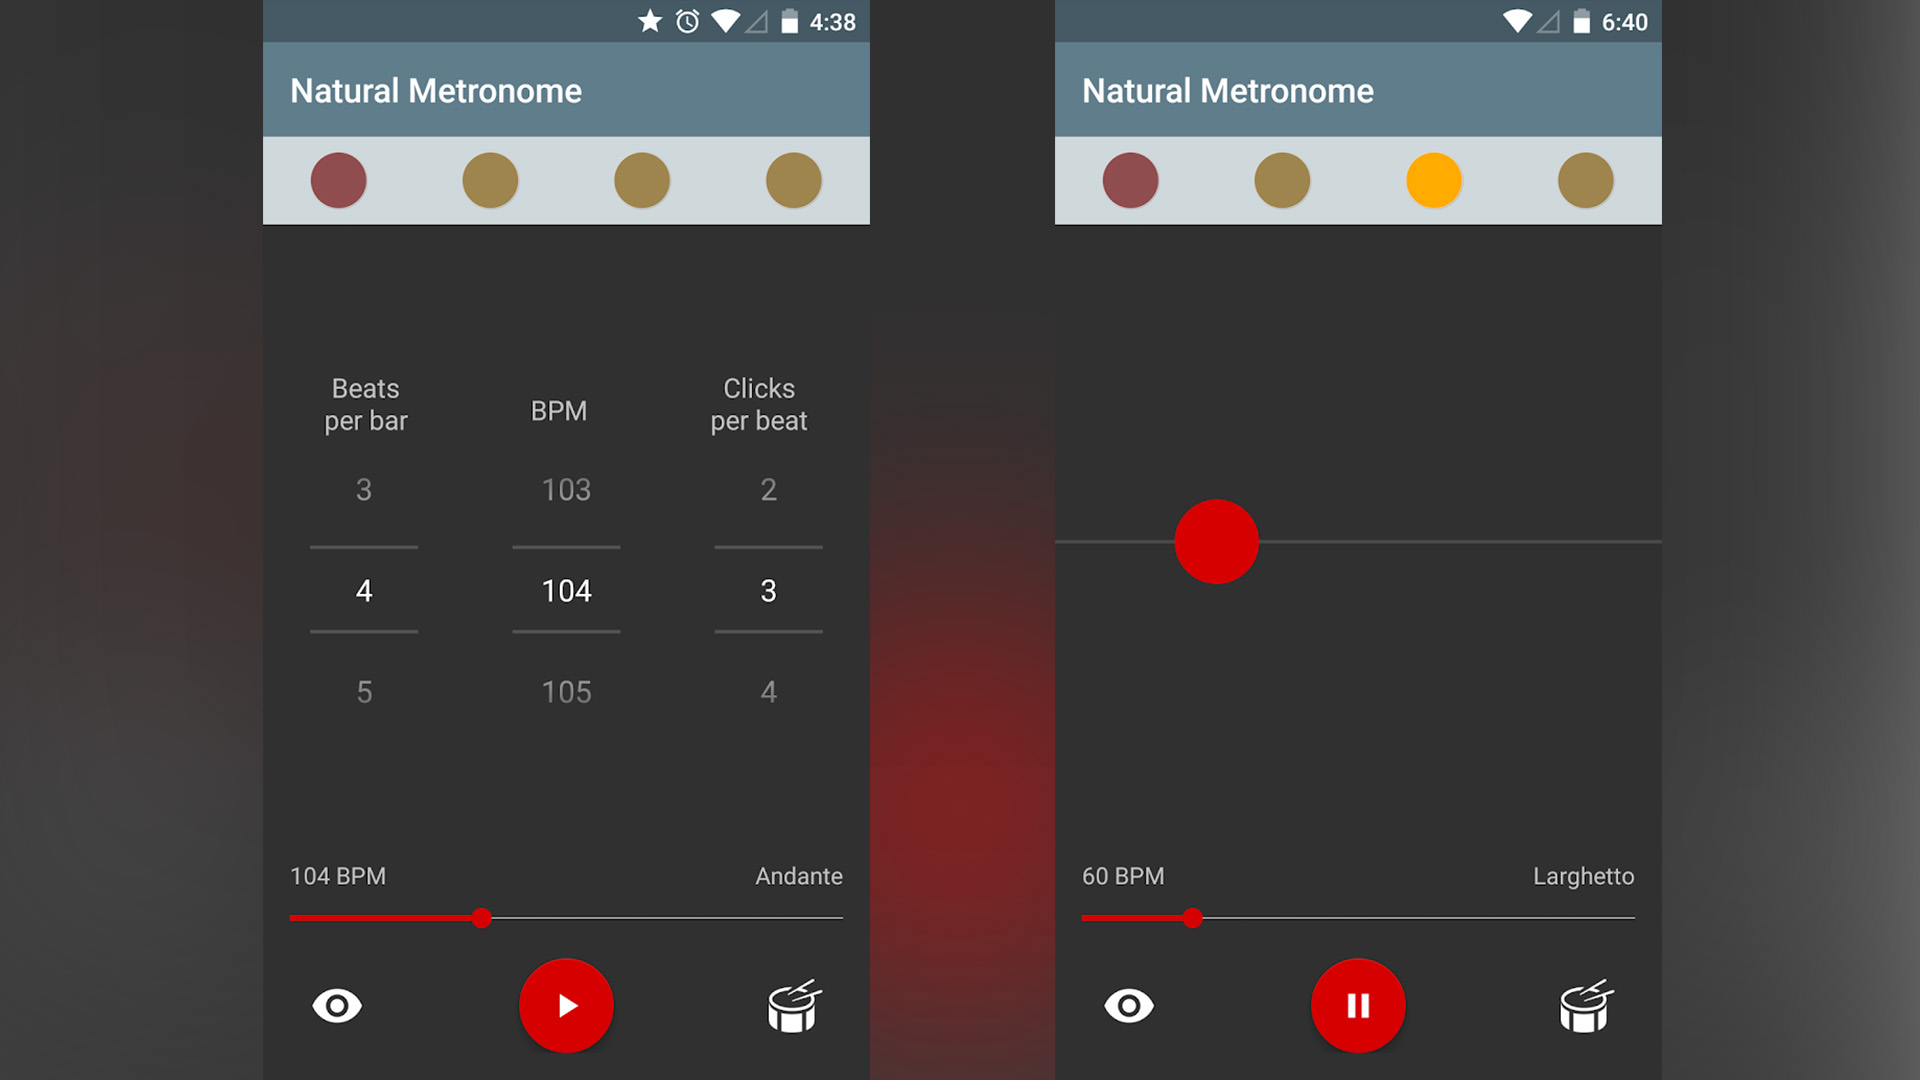 10 best metronome apps for Android to keep tempo - Android Authority